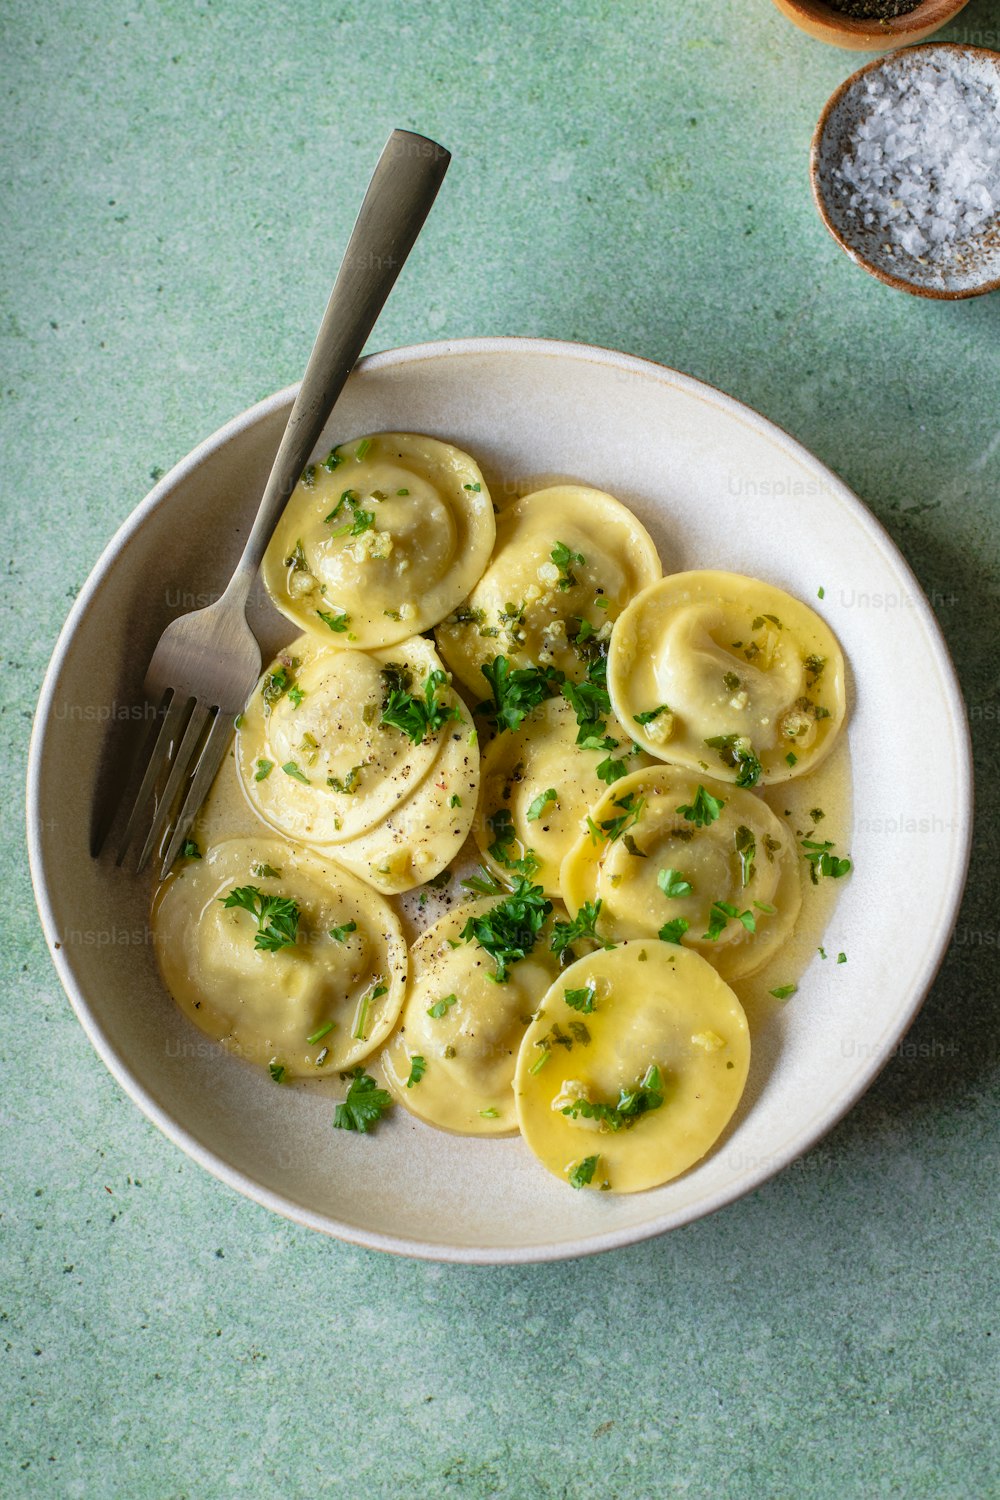 a bowl of ravioli with parsley on top